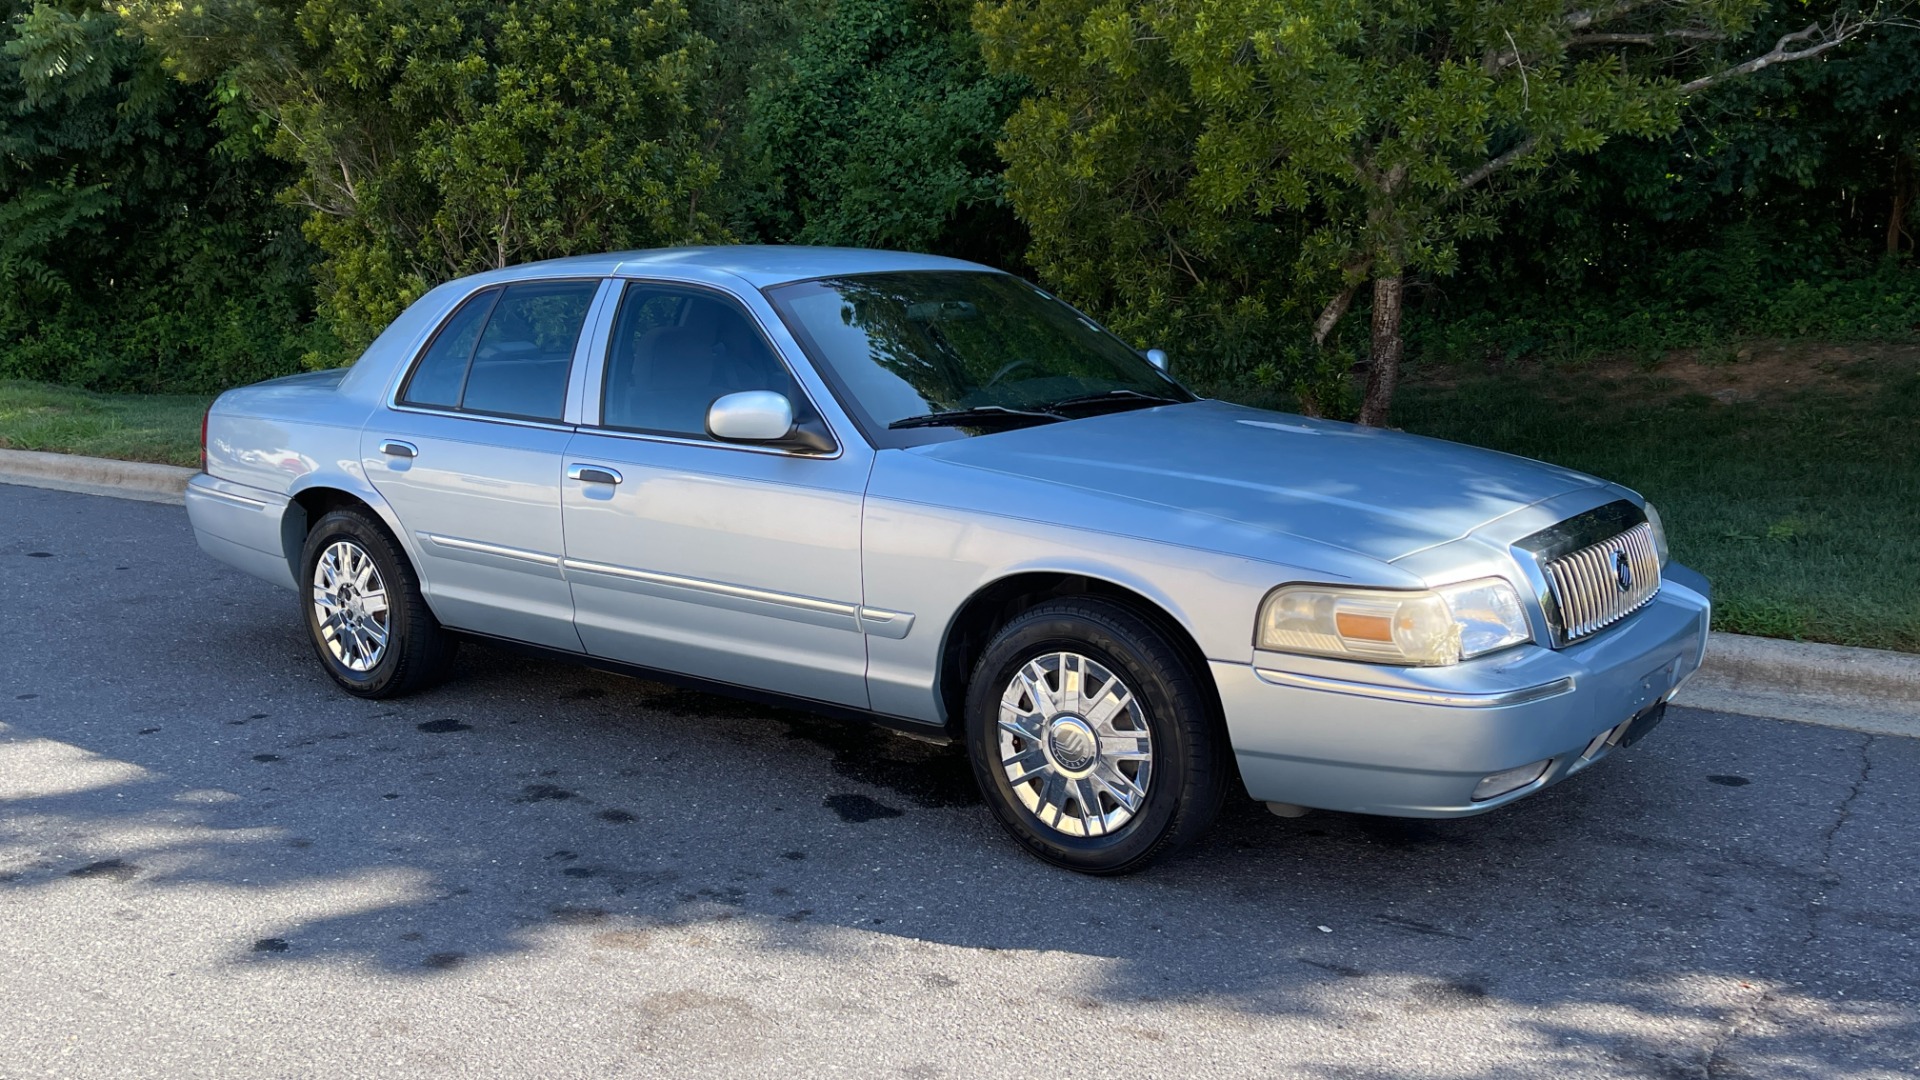 Used 2008 Mercury Grand Marquis GS / KEYLESS ENTRY / 8 WAY DRIVER SEAT / GS CONFIDENCE for sale Sold at Formula Imports in Charlotte NC 28227 2